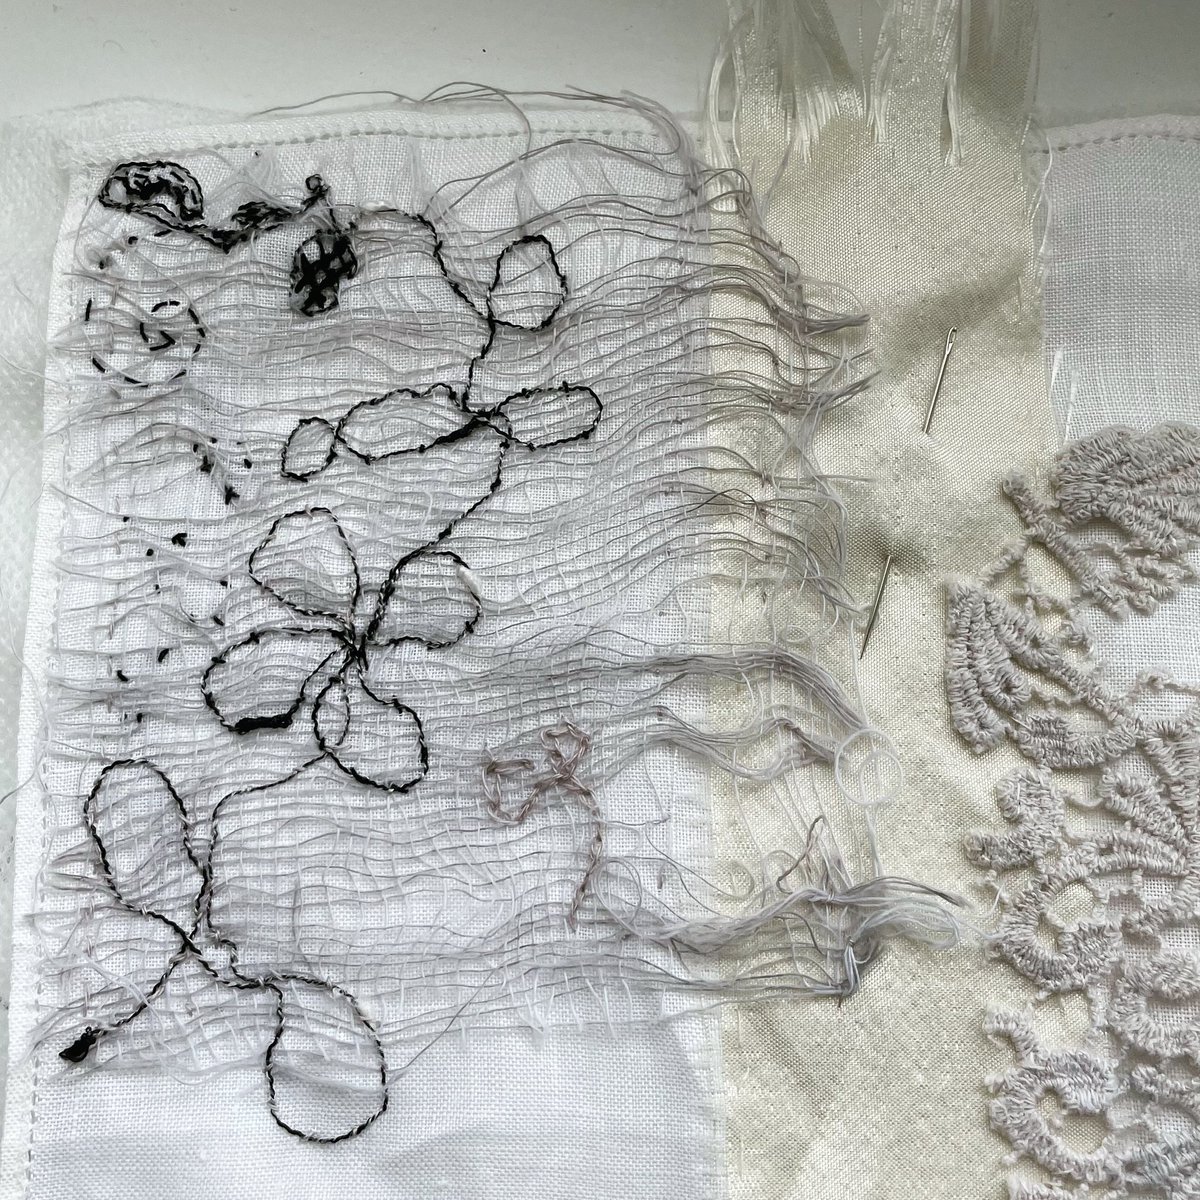 I have started some #slowstitching for the @PrismTextiles virtual embroidery challenge. I don’t have a plan, just enjoying the process
#prismvirtualchallenge #handstitching #mindfulstitching